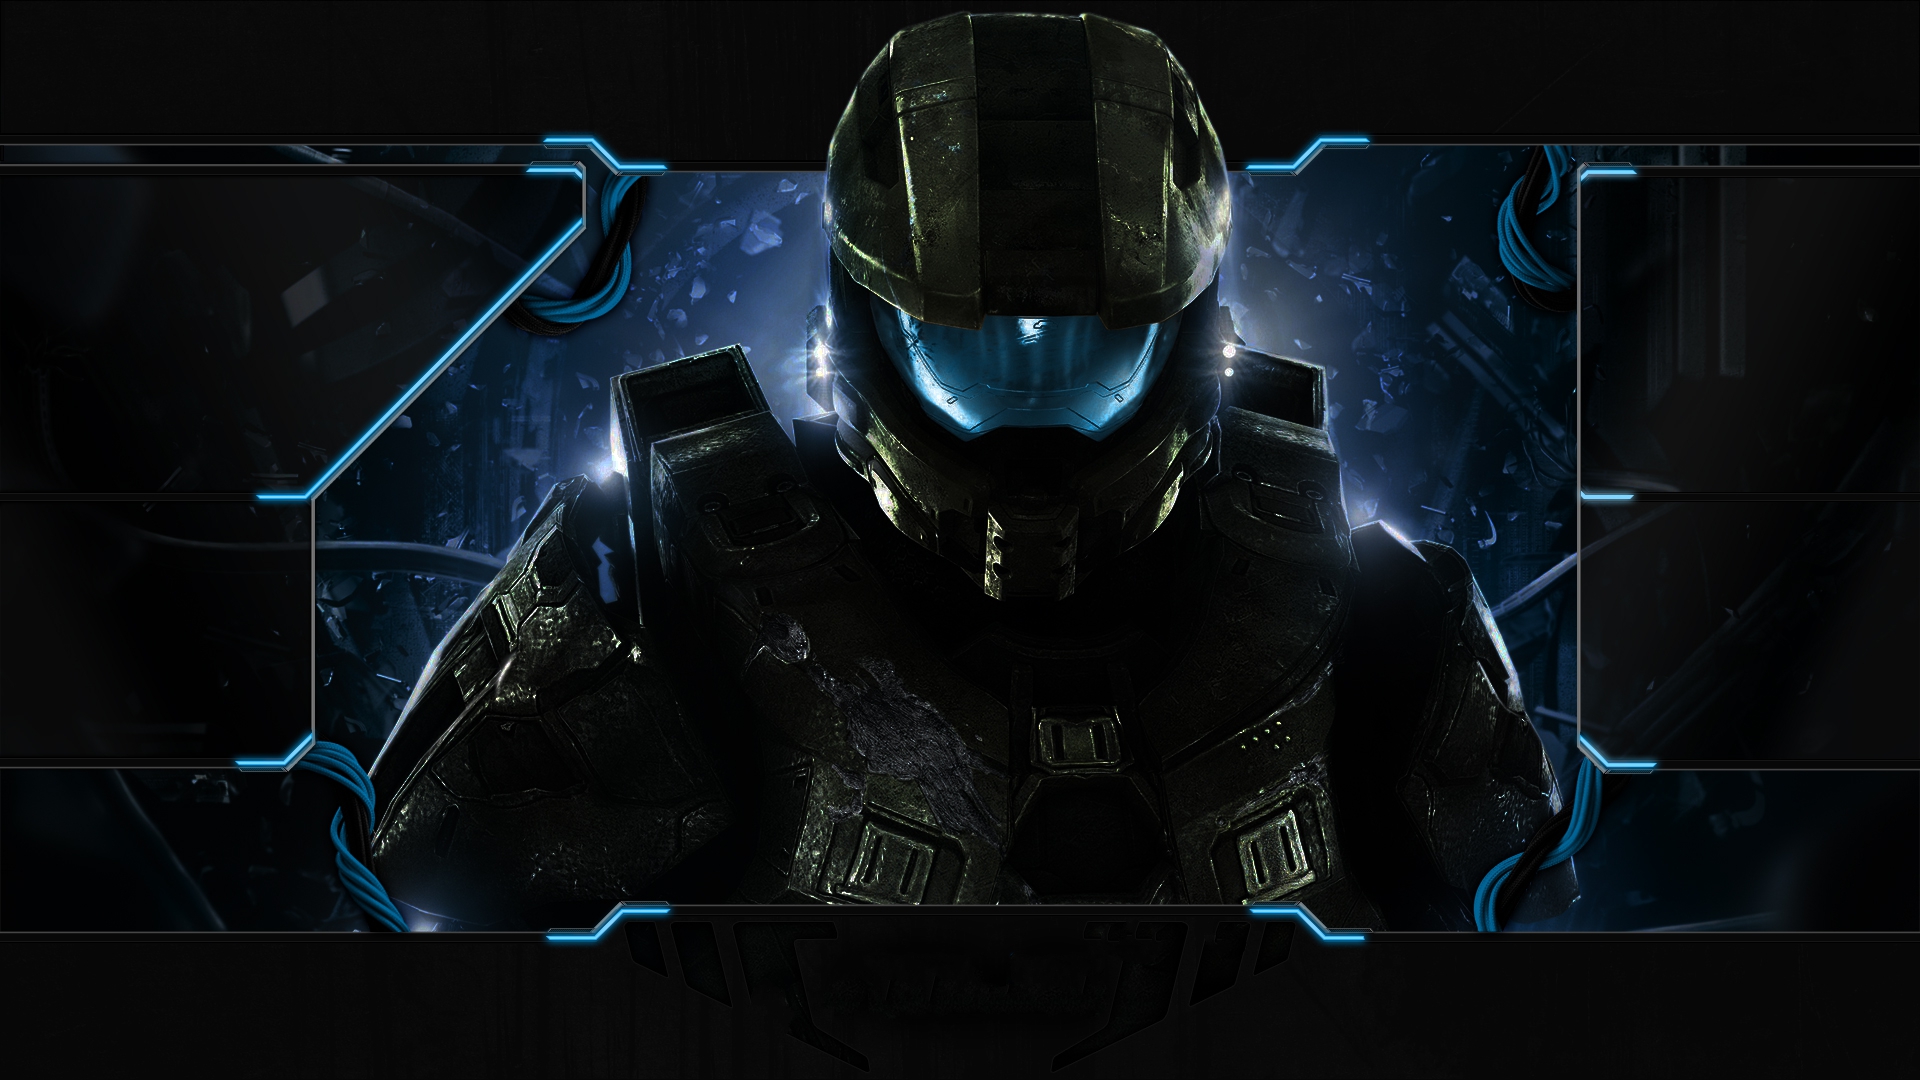 Video Game Halo 4 HD Wallpaper | Background Image